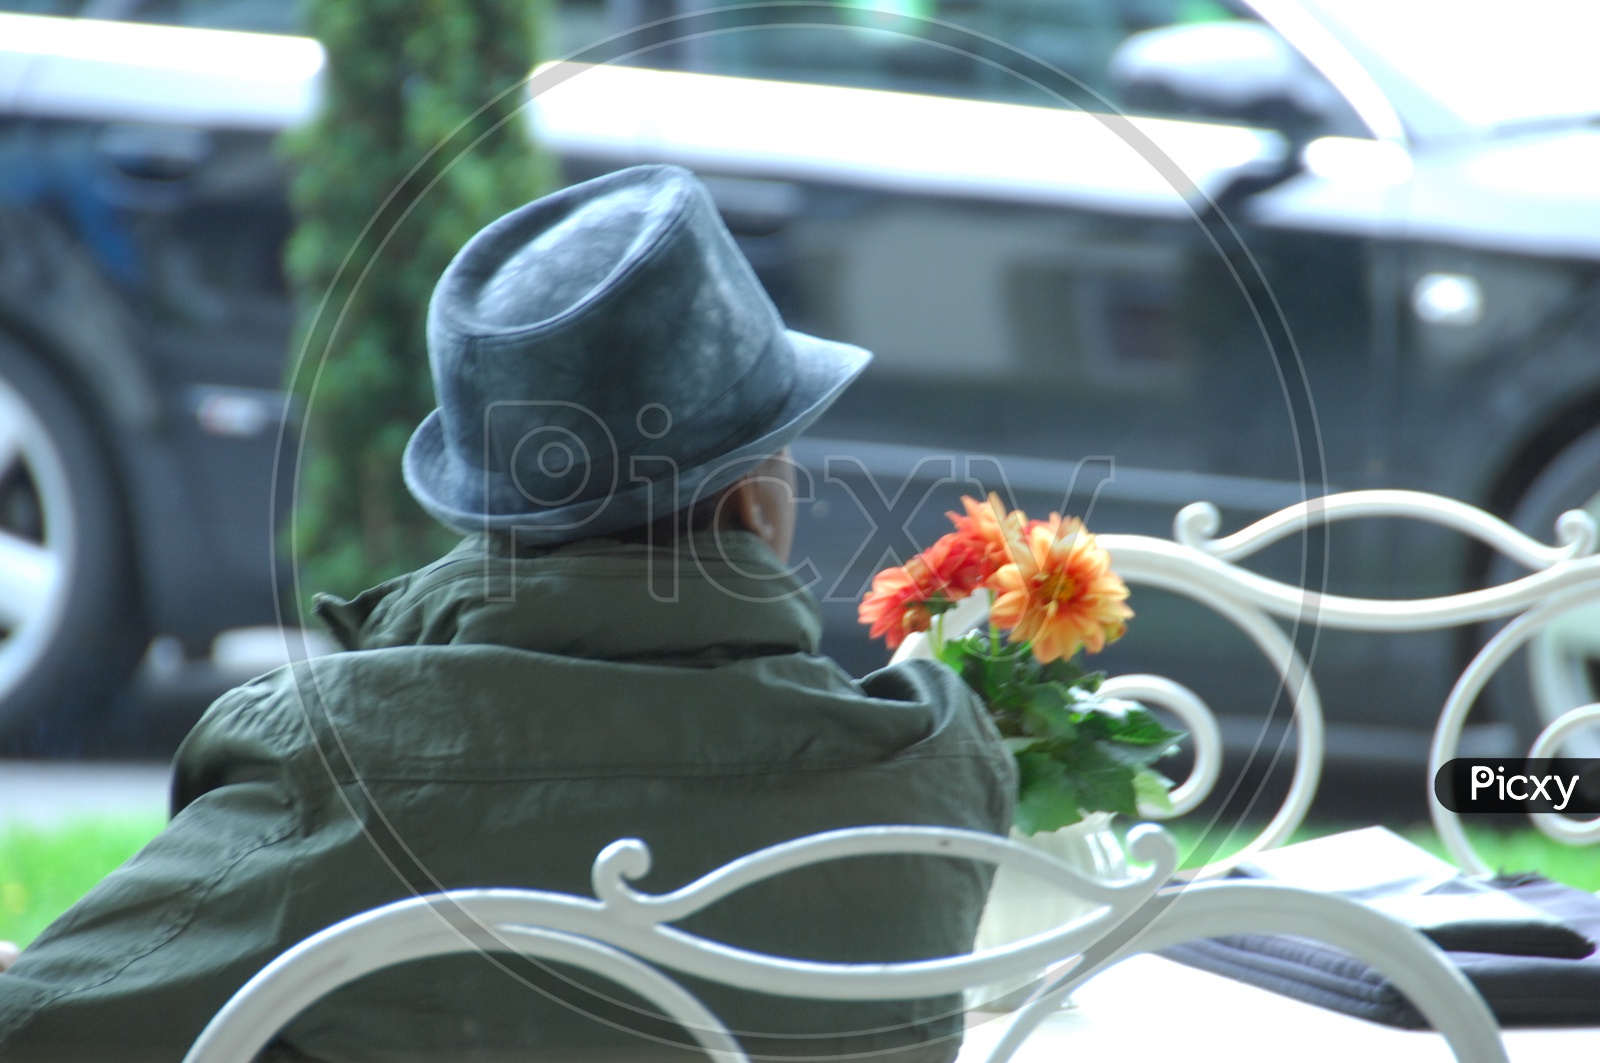 A Man Sitting On a Bench Holding Flowers in Hand